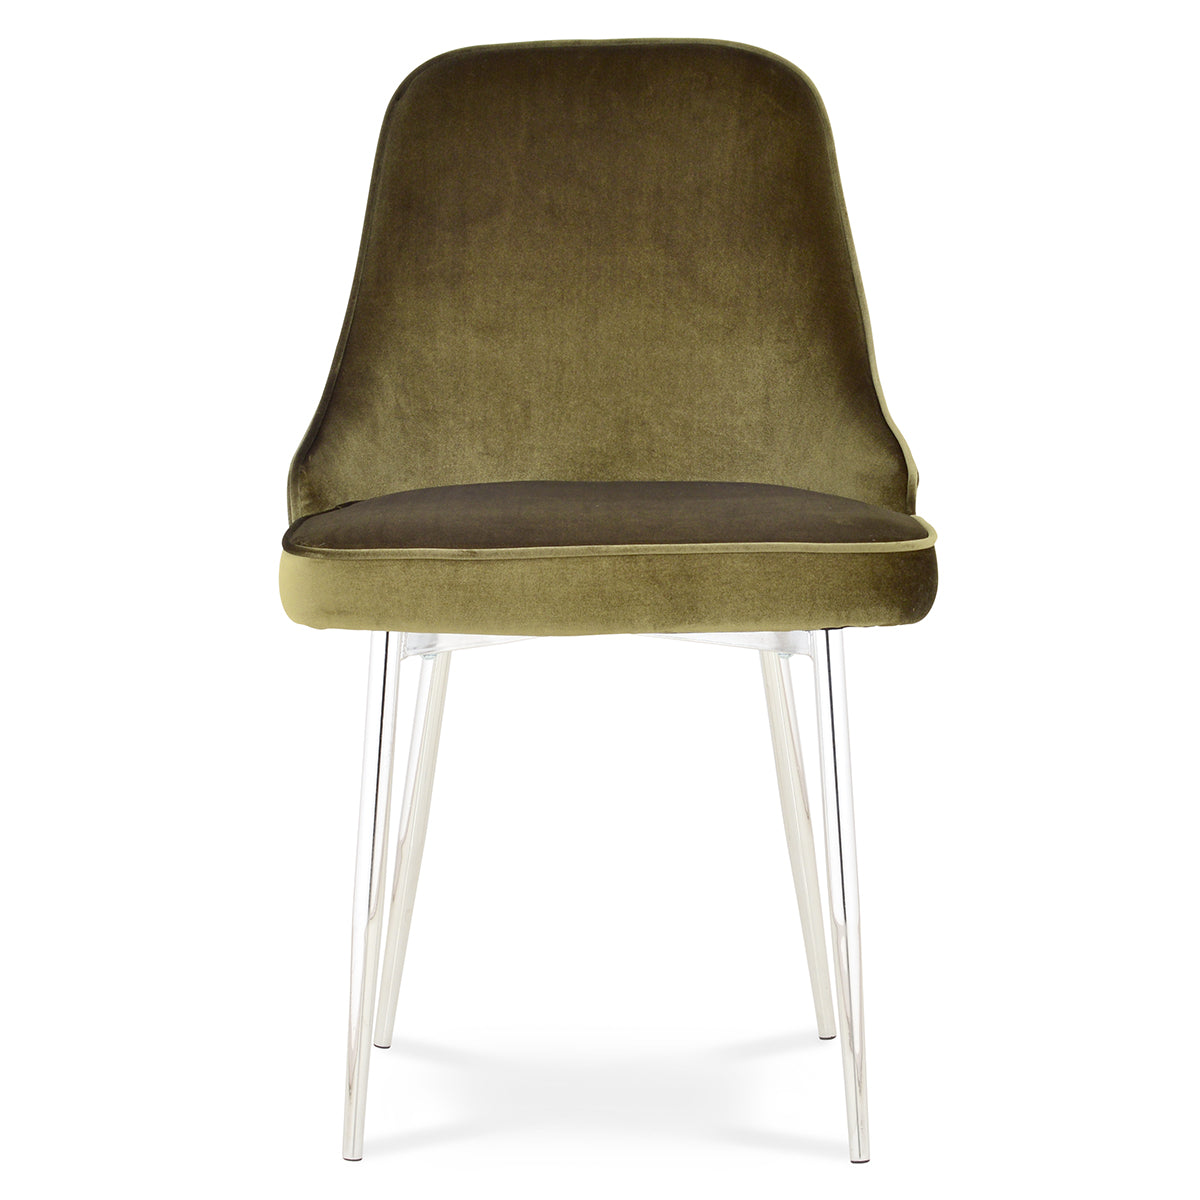 FONDHOUSE Yink Chair